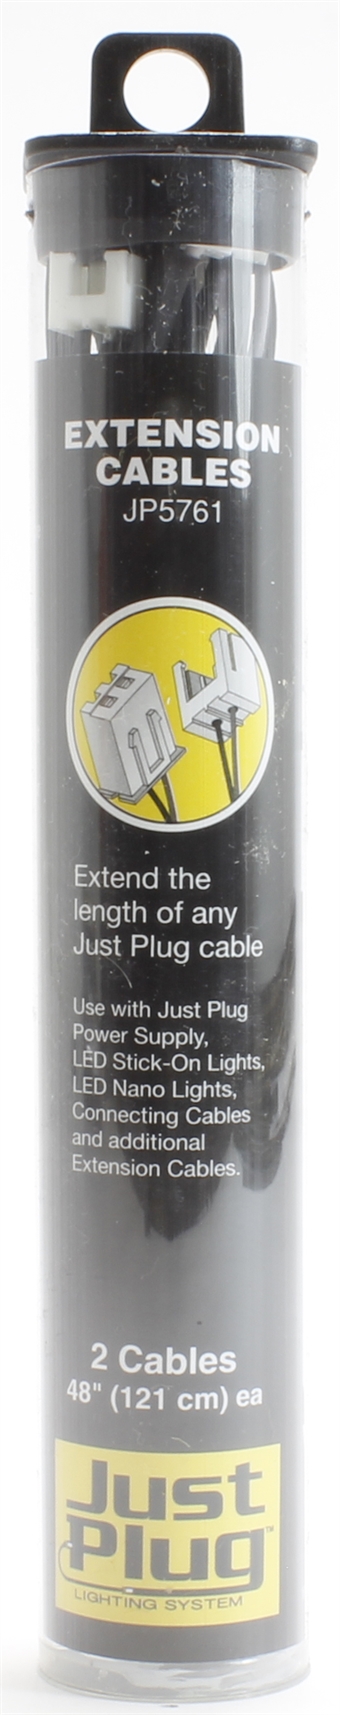 Extension cable for Just Plug lighting system